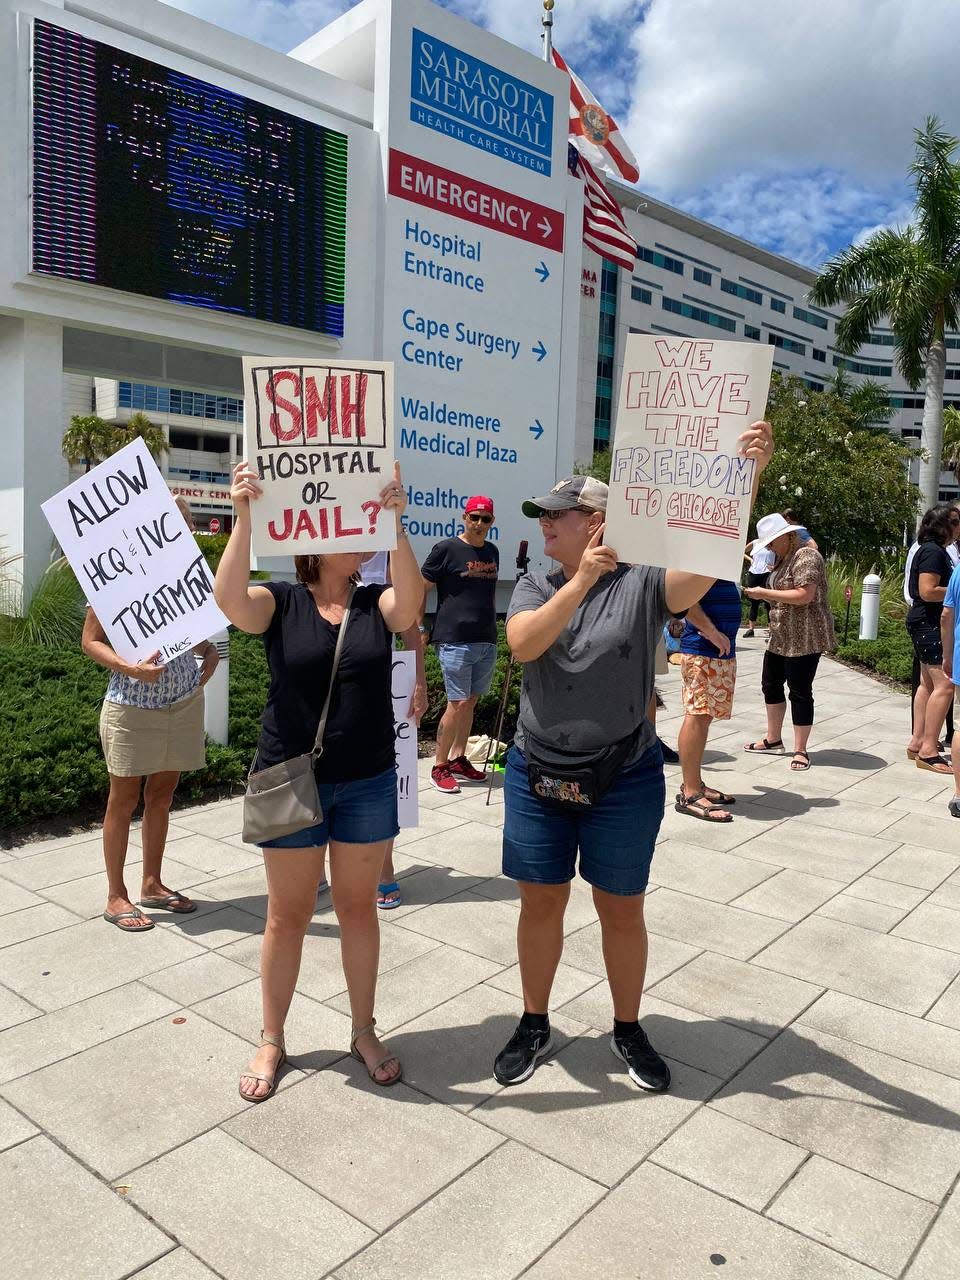 Protesters demonstrated outside Sarasota Memorial Hospital last year after a doctor who was being treated for COVID-19 accused the hospital of mistreating him and providing inadequate treatment to another COVID-19 patient. That doctor's claims have become an issue in Sarasota County Hospital Board races this year.